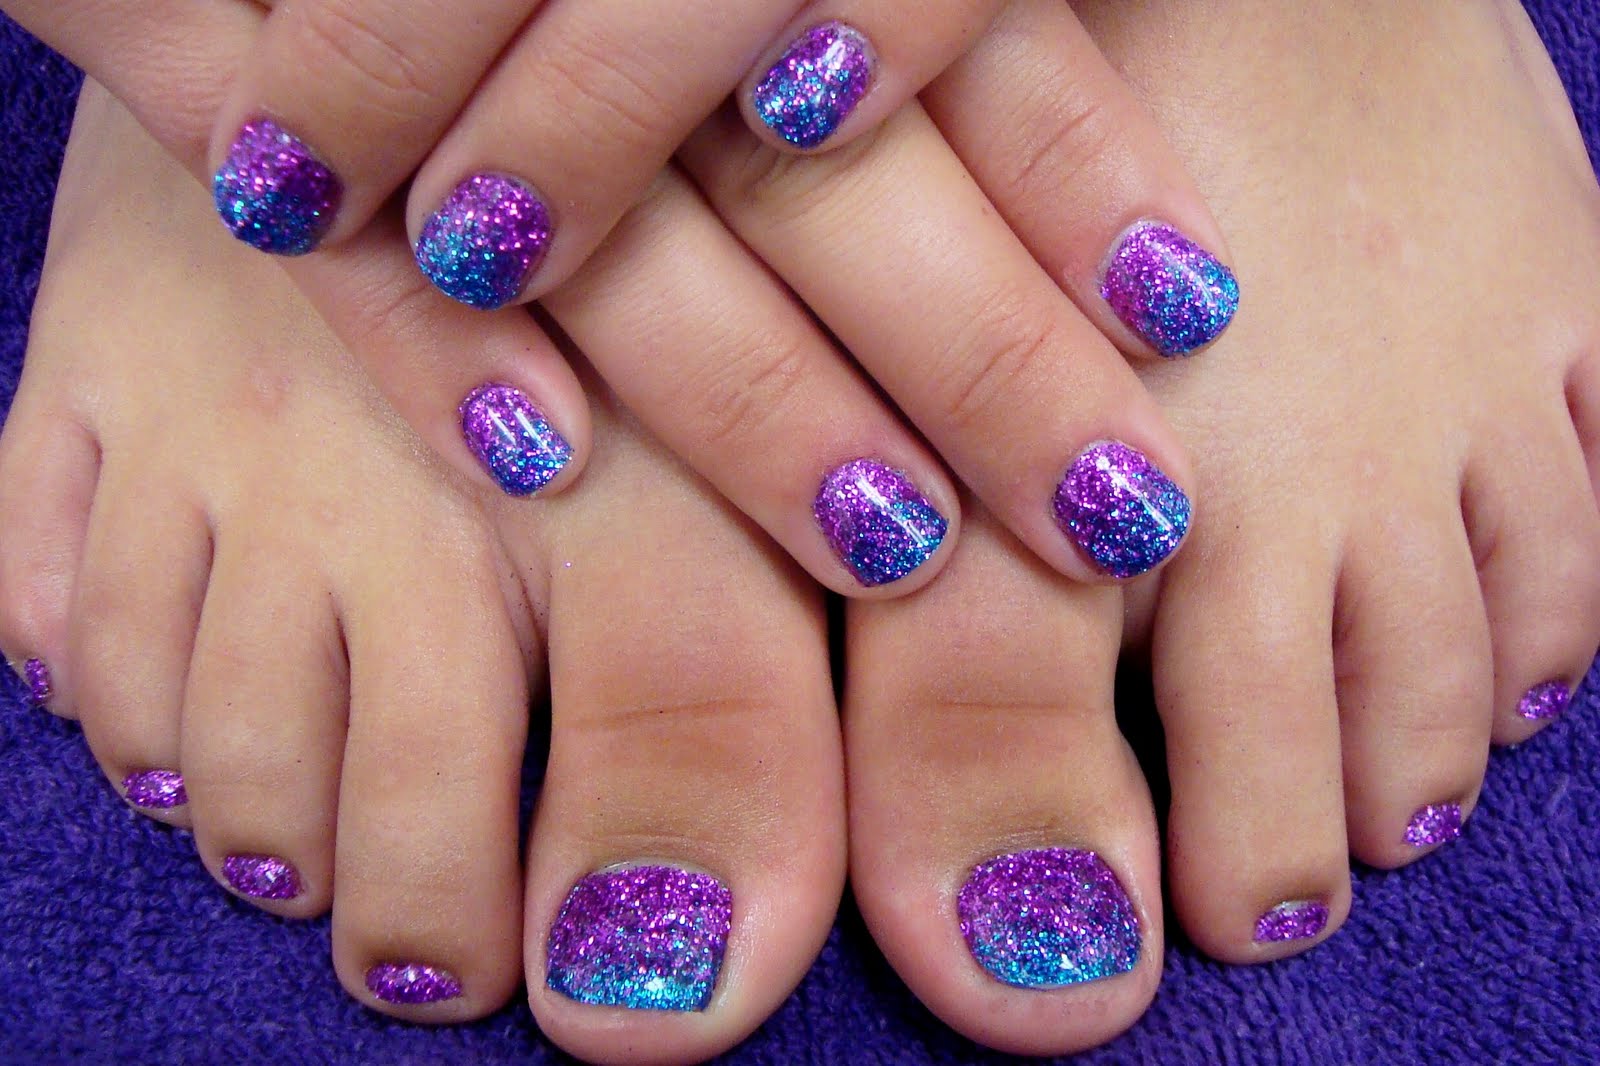 7. Ombre Toe Nail Art with Glitter - wide 3